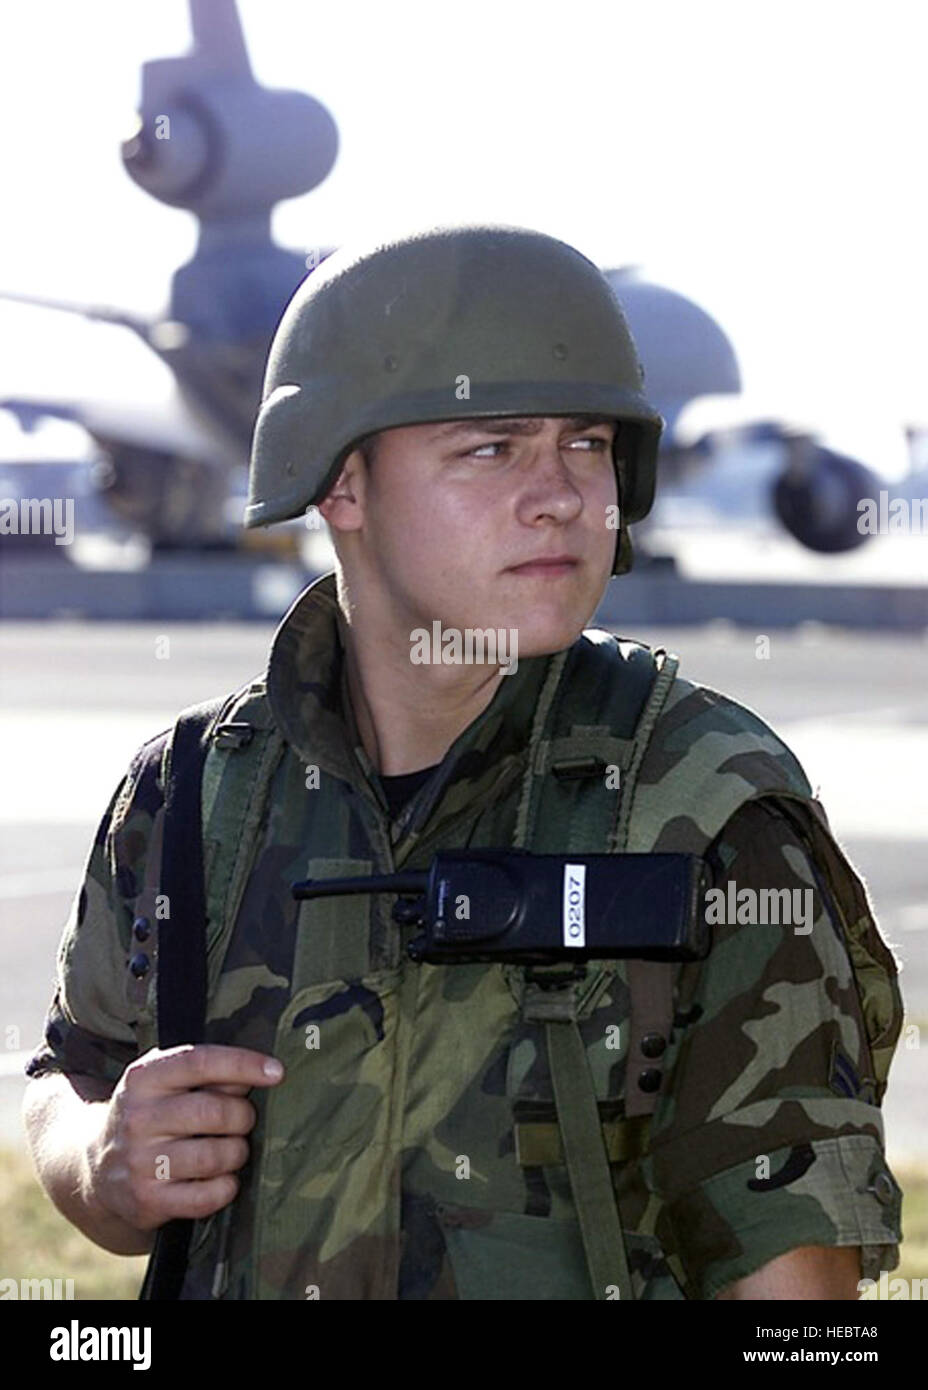 Airman First Class Thomas Messick of the 514th Security Forces Squadron, McGuire Air Force Base, N.J., guards the McGuire flightline on Sept. 11, 2001, in response to the terrorist attacks at the Pentagon, the World Trade Center of New York City and in Pennsylvania. In Air Mobility Command, the response to the attacks was immediate. At McGuire, now named Joint Base McGuire-Dix-Lakehurst, search and rescue teams and medical supplies were airlifted there by AMC aircraft and crews on Sept. 12. McGuire became the designated site by FEMA to house and feed urban search and rescue teams operating in  Stock Photo